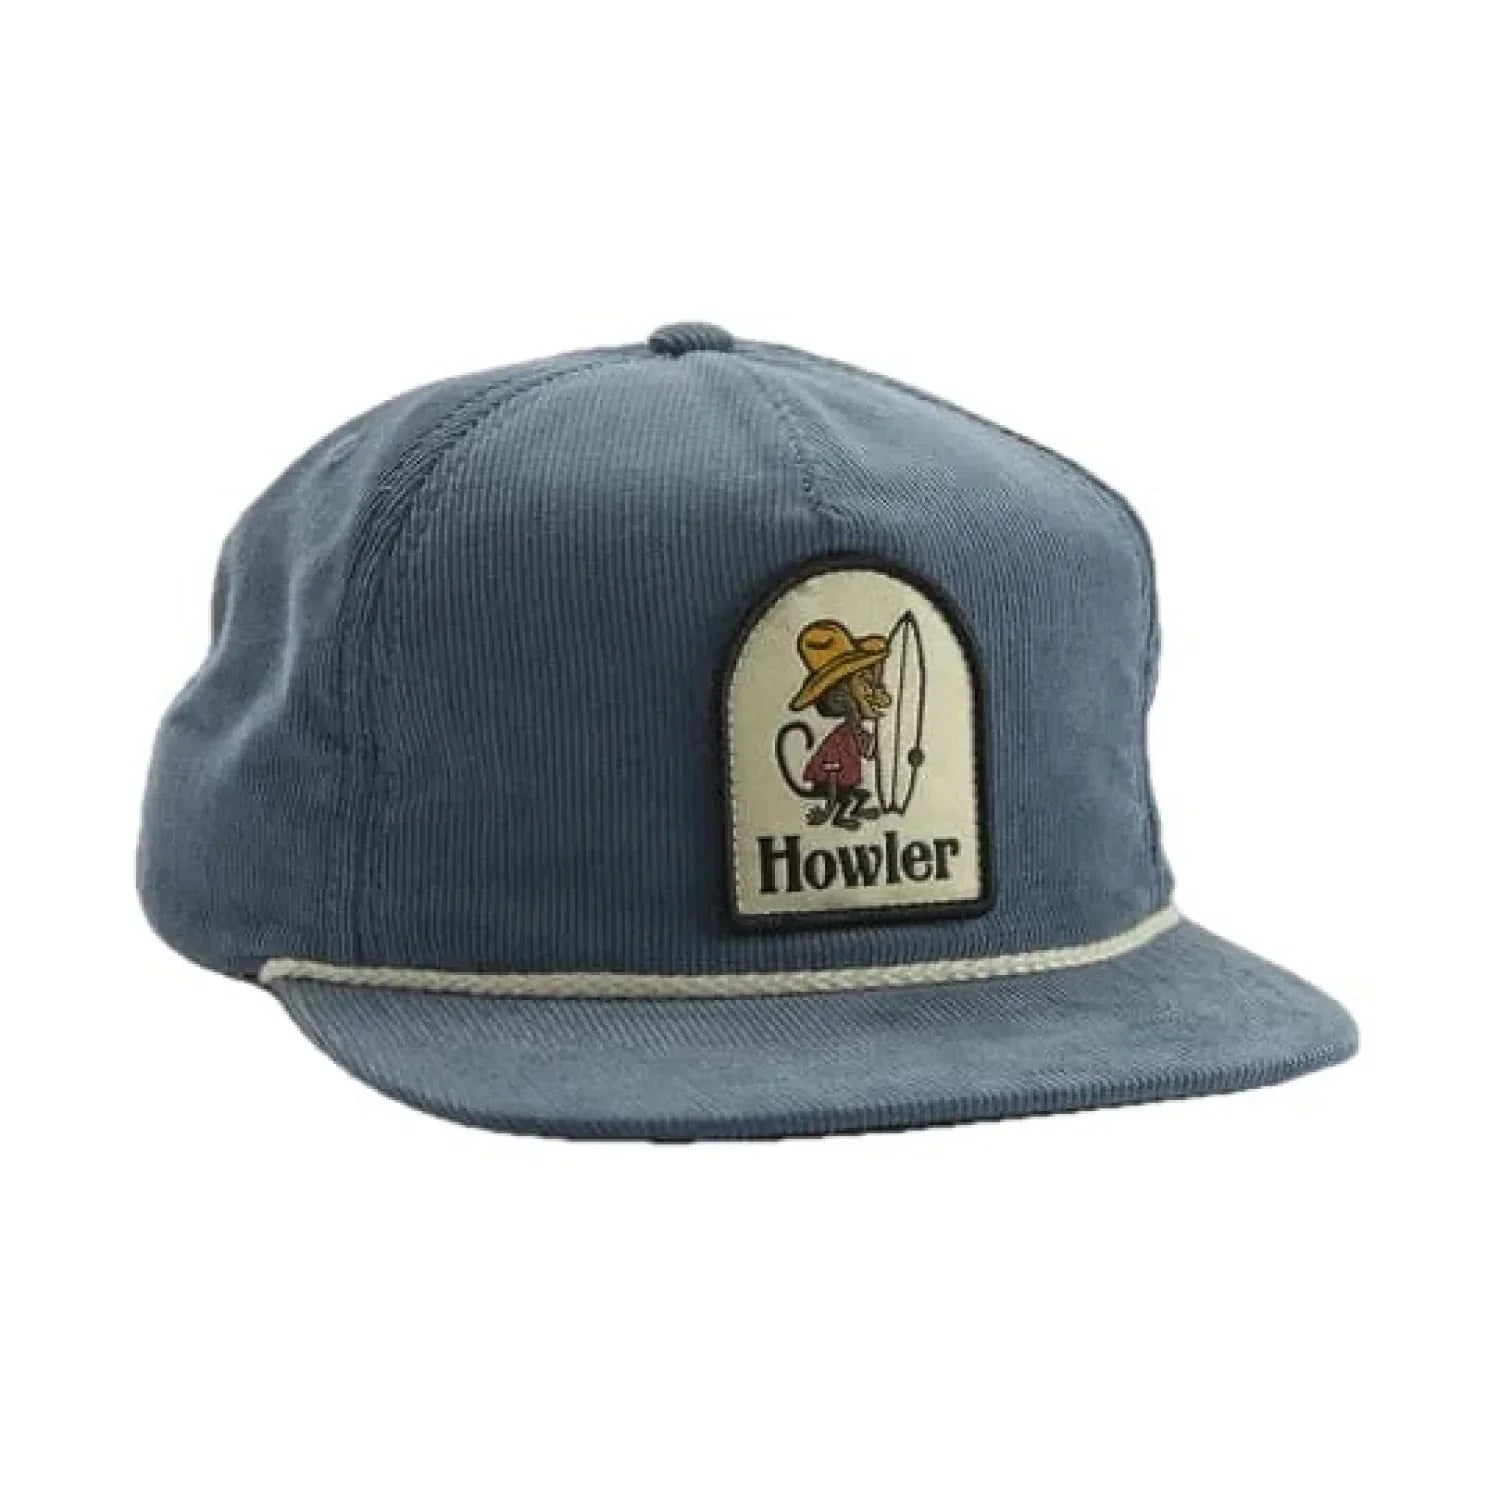 Howler Bros 20. HATS_GLOVES_SCARVES - HATS Unstructured Snapback Hats EL MONITO SURFS | BLUE One Size